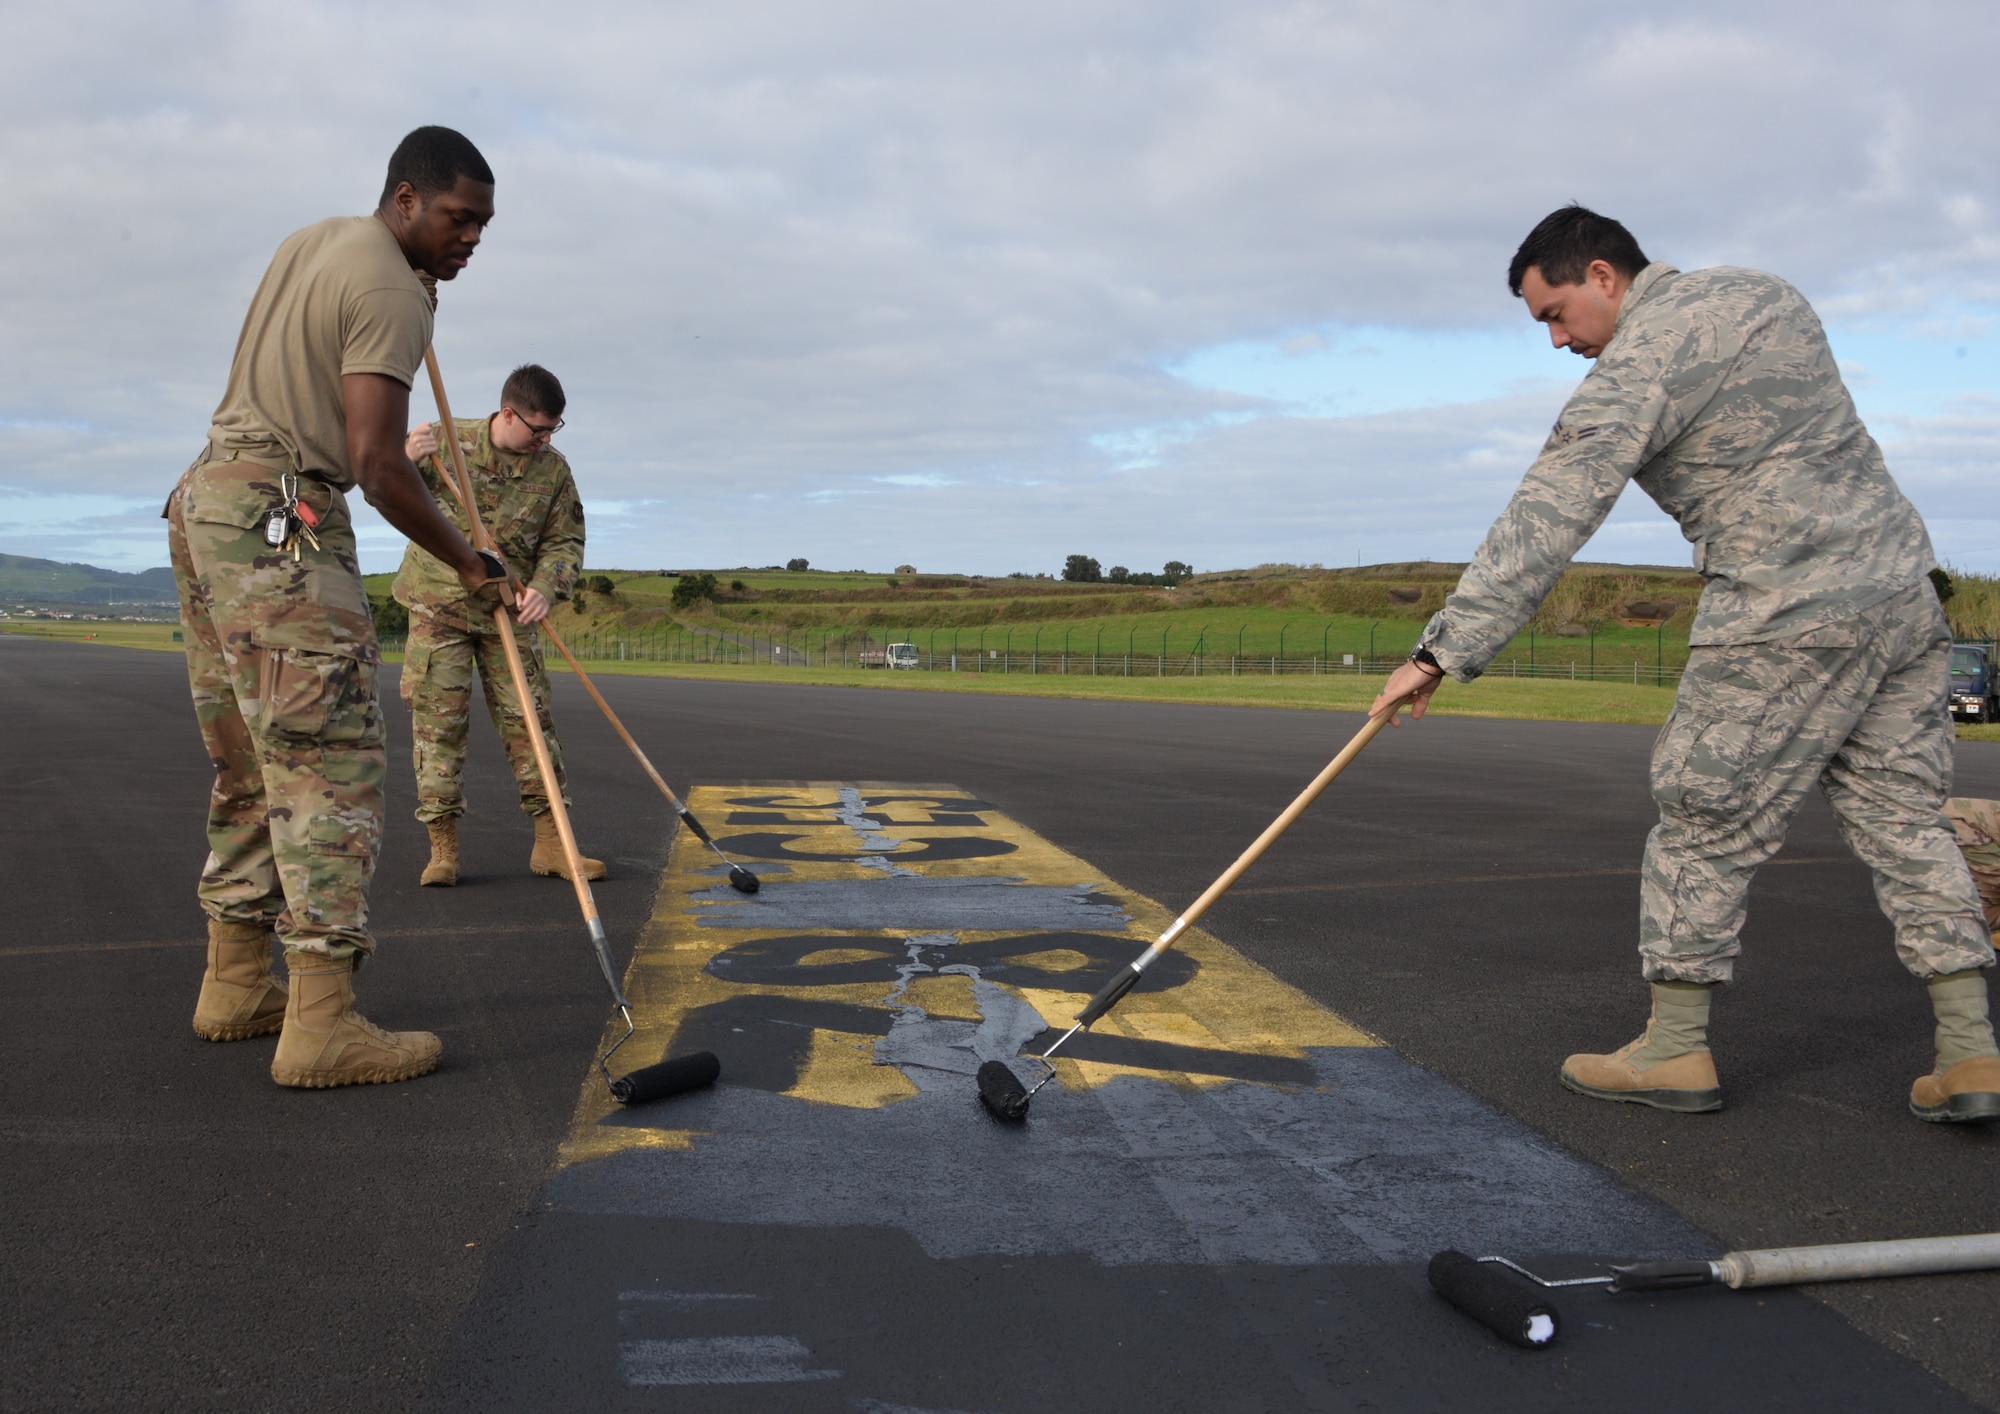 U.S. Air Force Airmen from the 786th Civil Engineer Squadron paint over runway markings at Lajes Field, Portugal, Dec 12, 2019. The changes get the landing zone one step closer to being certified and operational. (U.S. Air Force photo by Ricky Baptista)